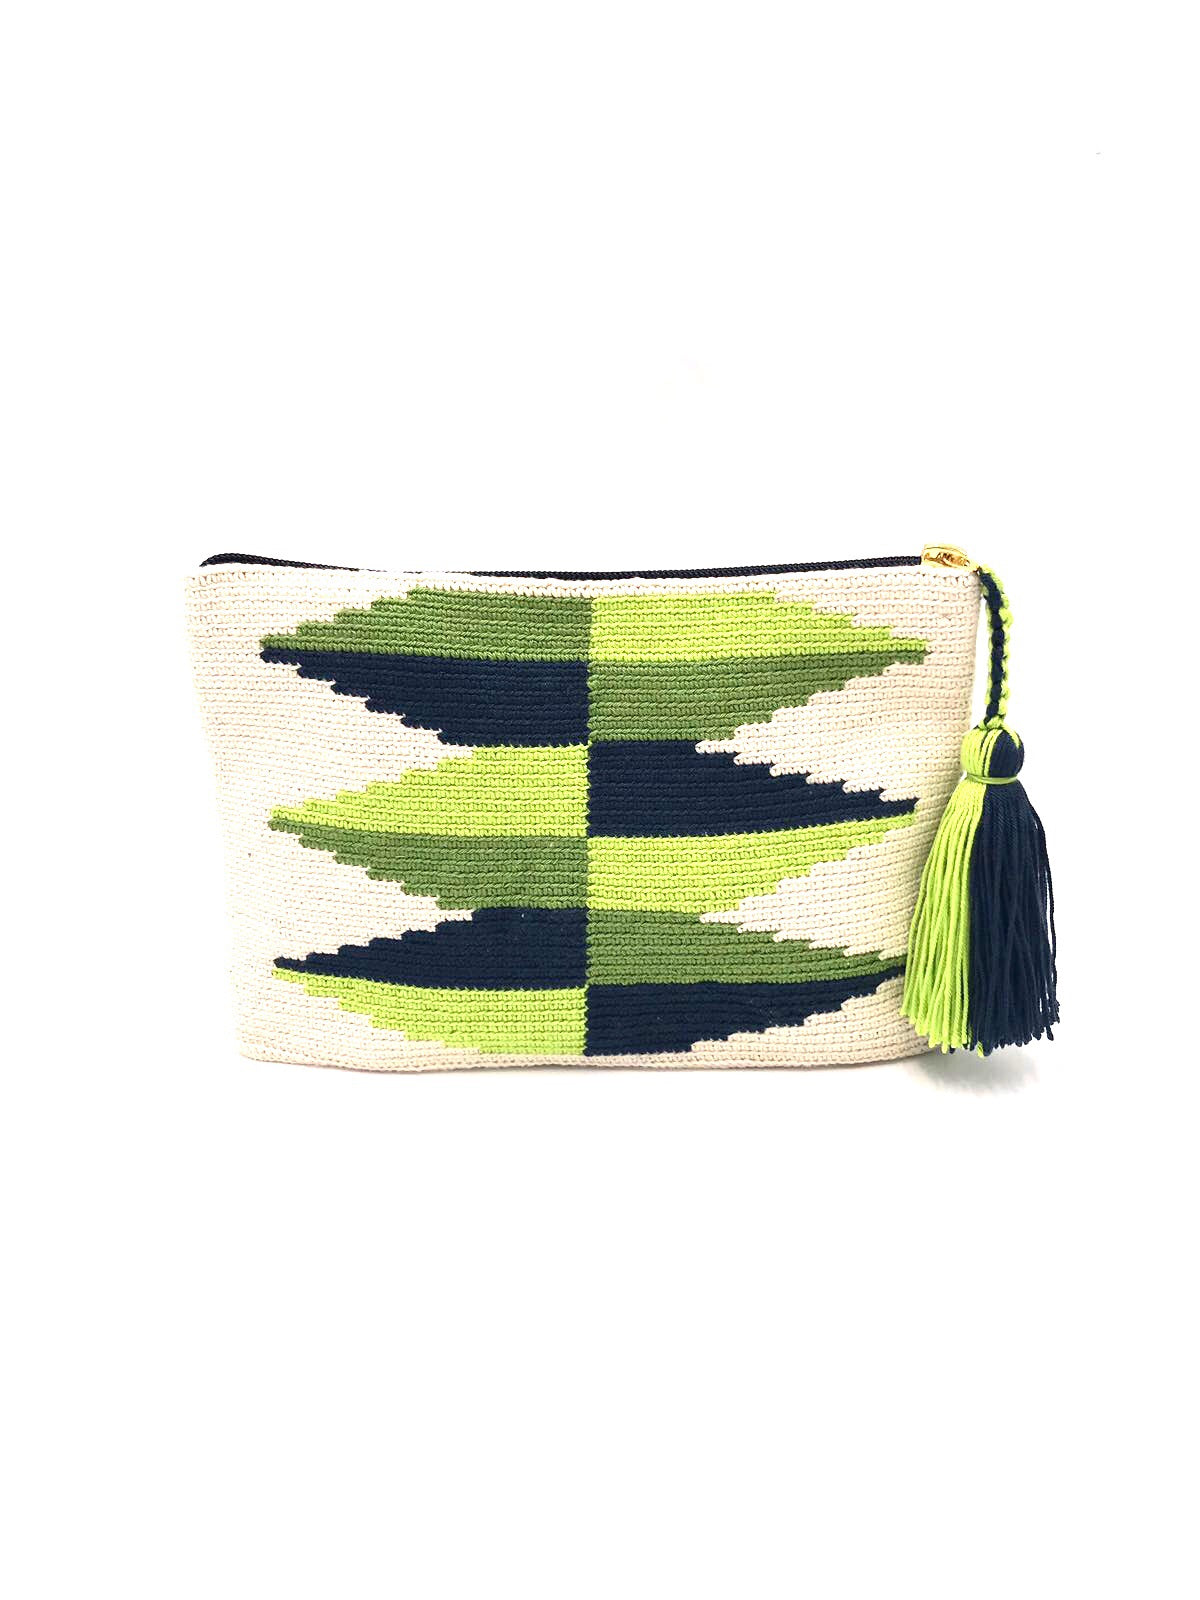 Clutch, cream body, light green and grass green inverted triangles